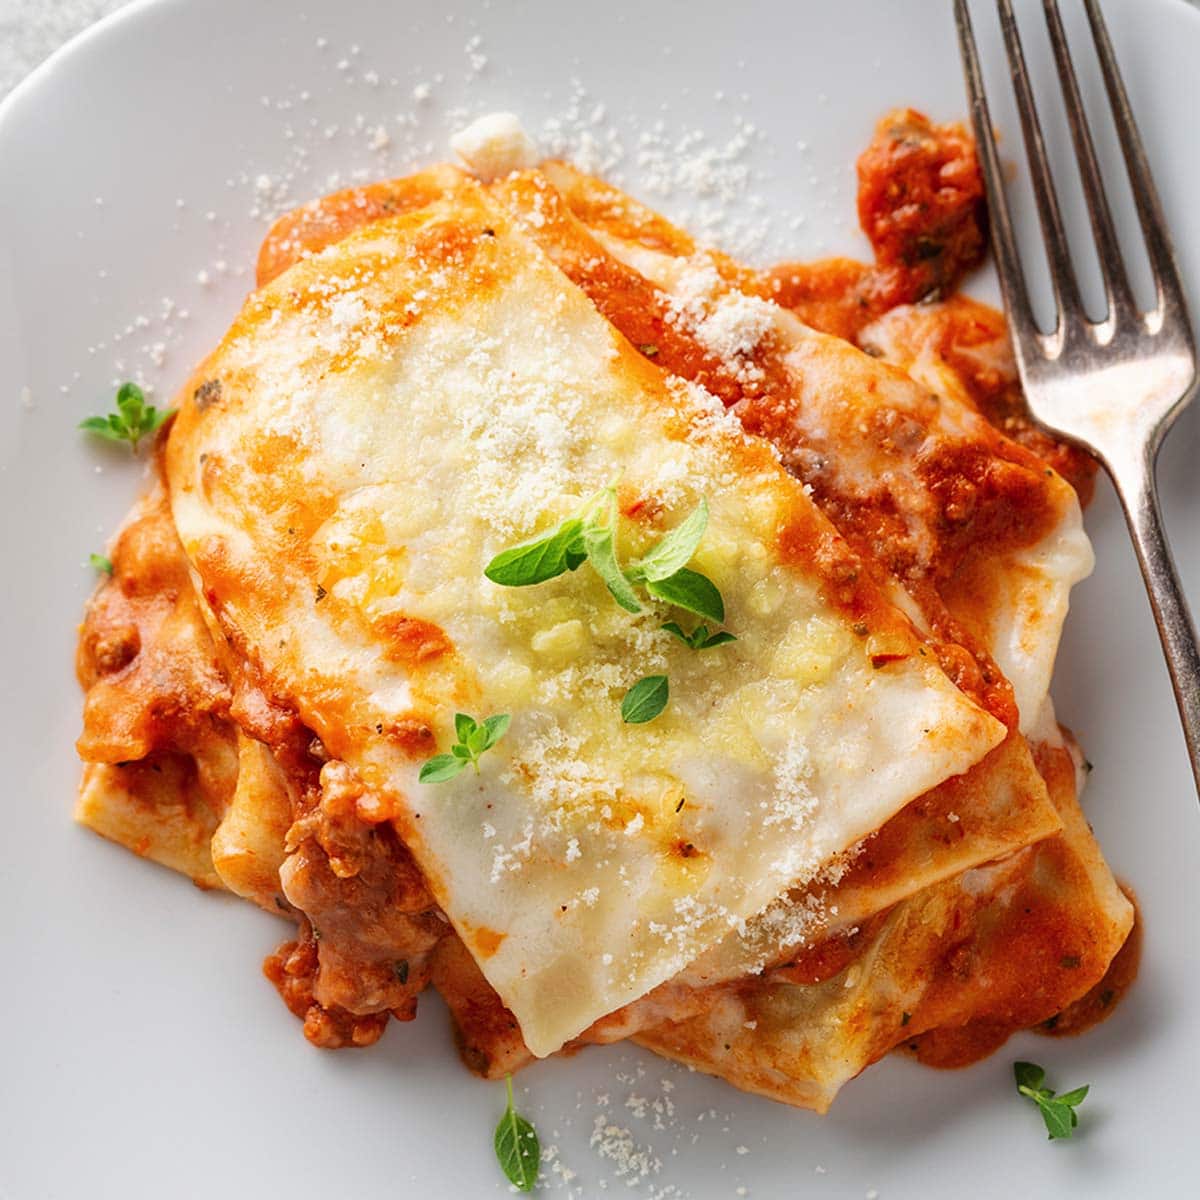 Reheating lasagna is easy if you know how to do it. You can still achieve the same cheesy and herby experience even after a day or two.